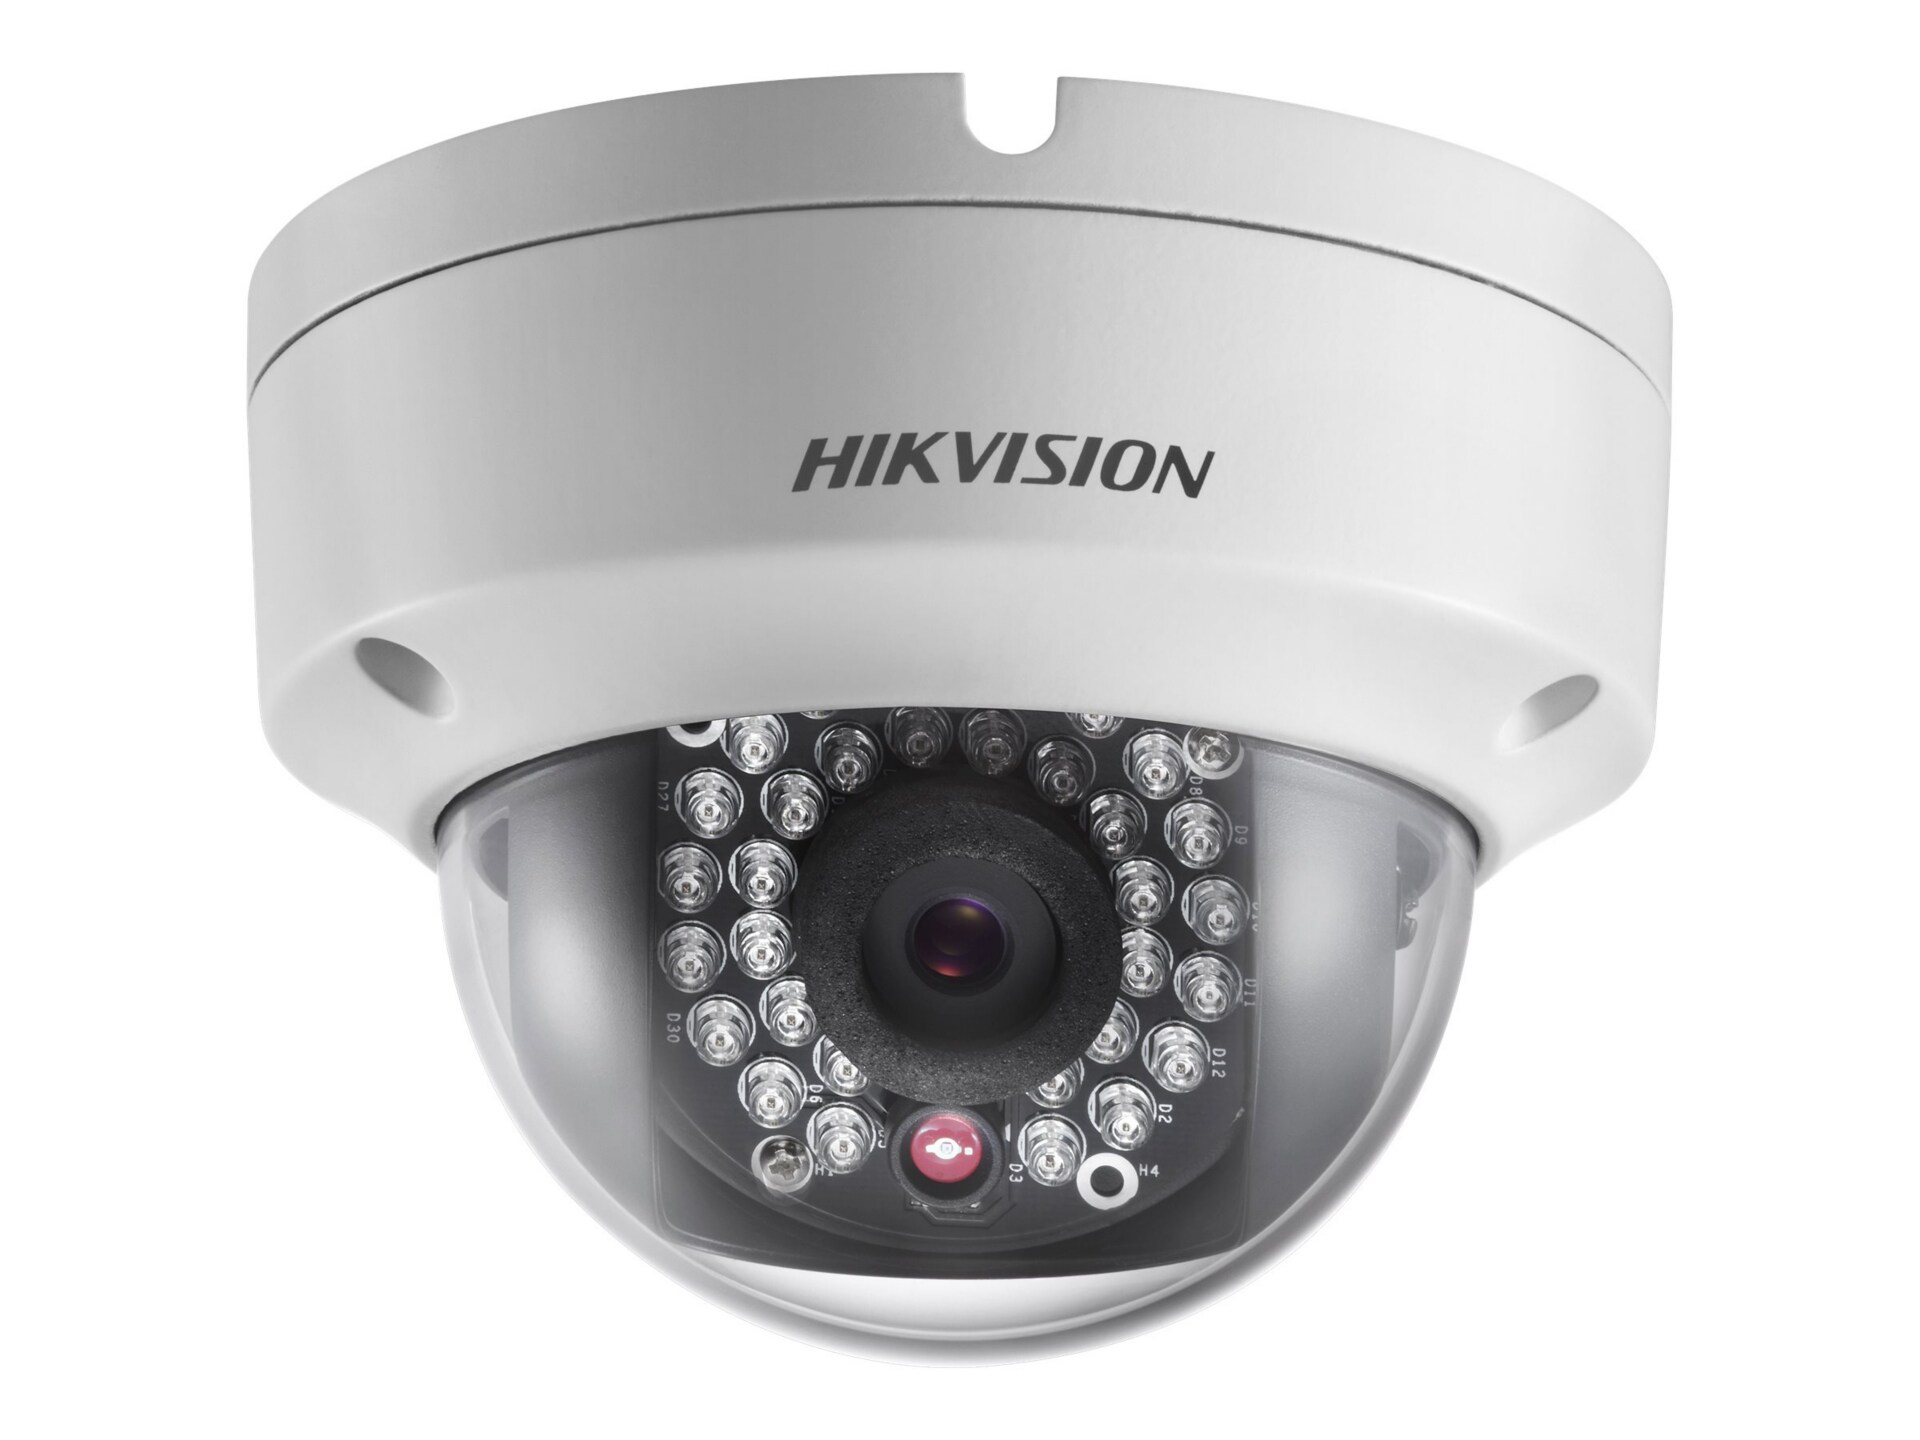 Hikvision DS-2CD2152F-IS - Value Series - network surveillance camera